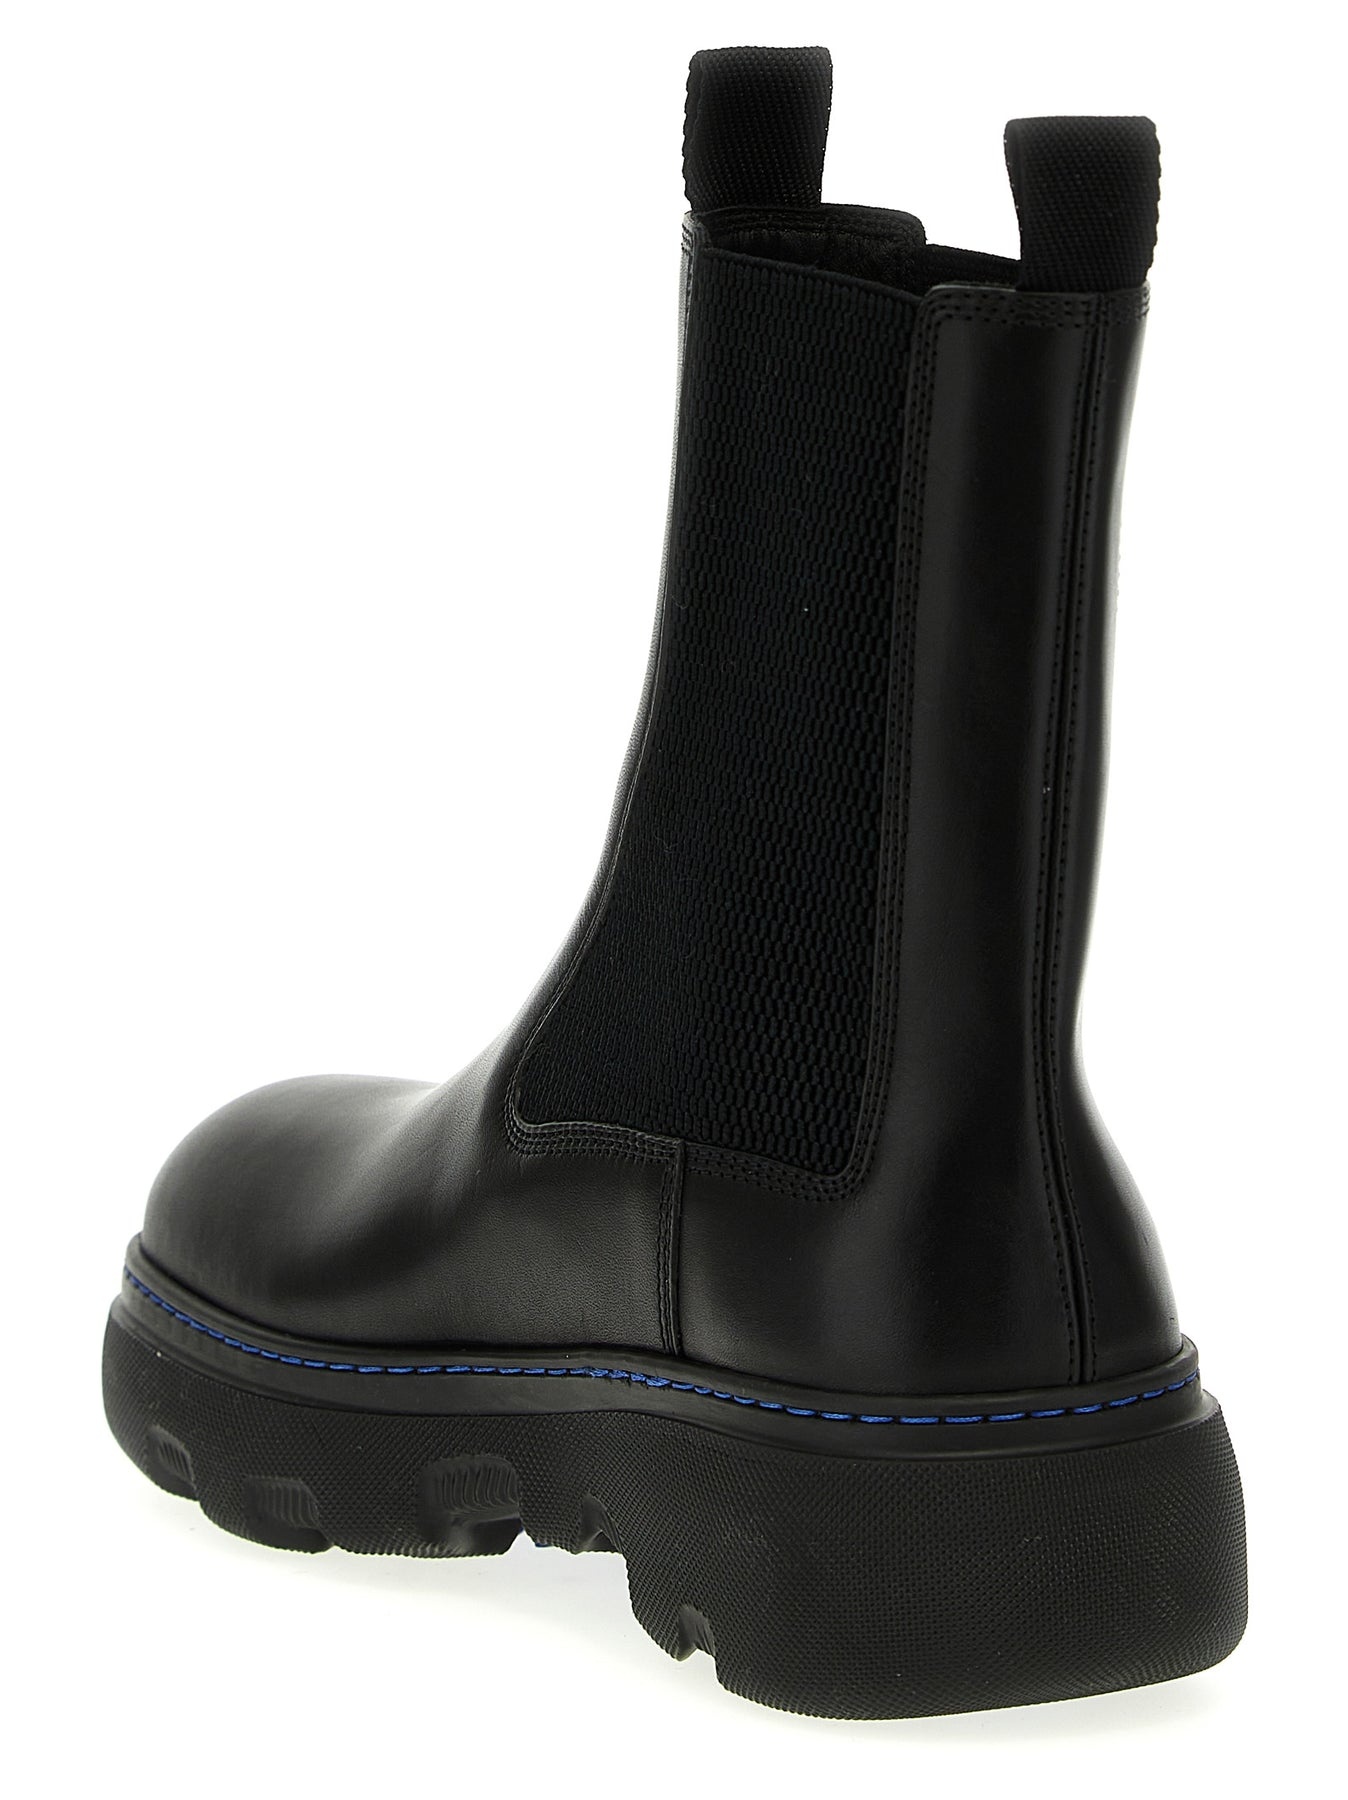 Chelsea Creeper Boots, Ankle Boots Black - 2